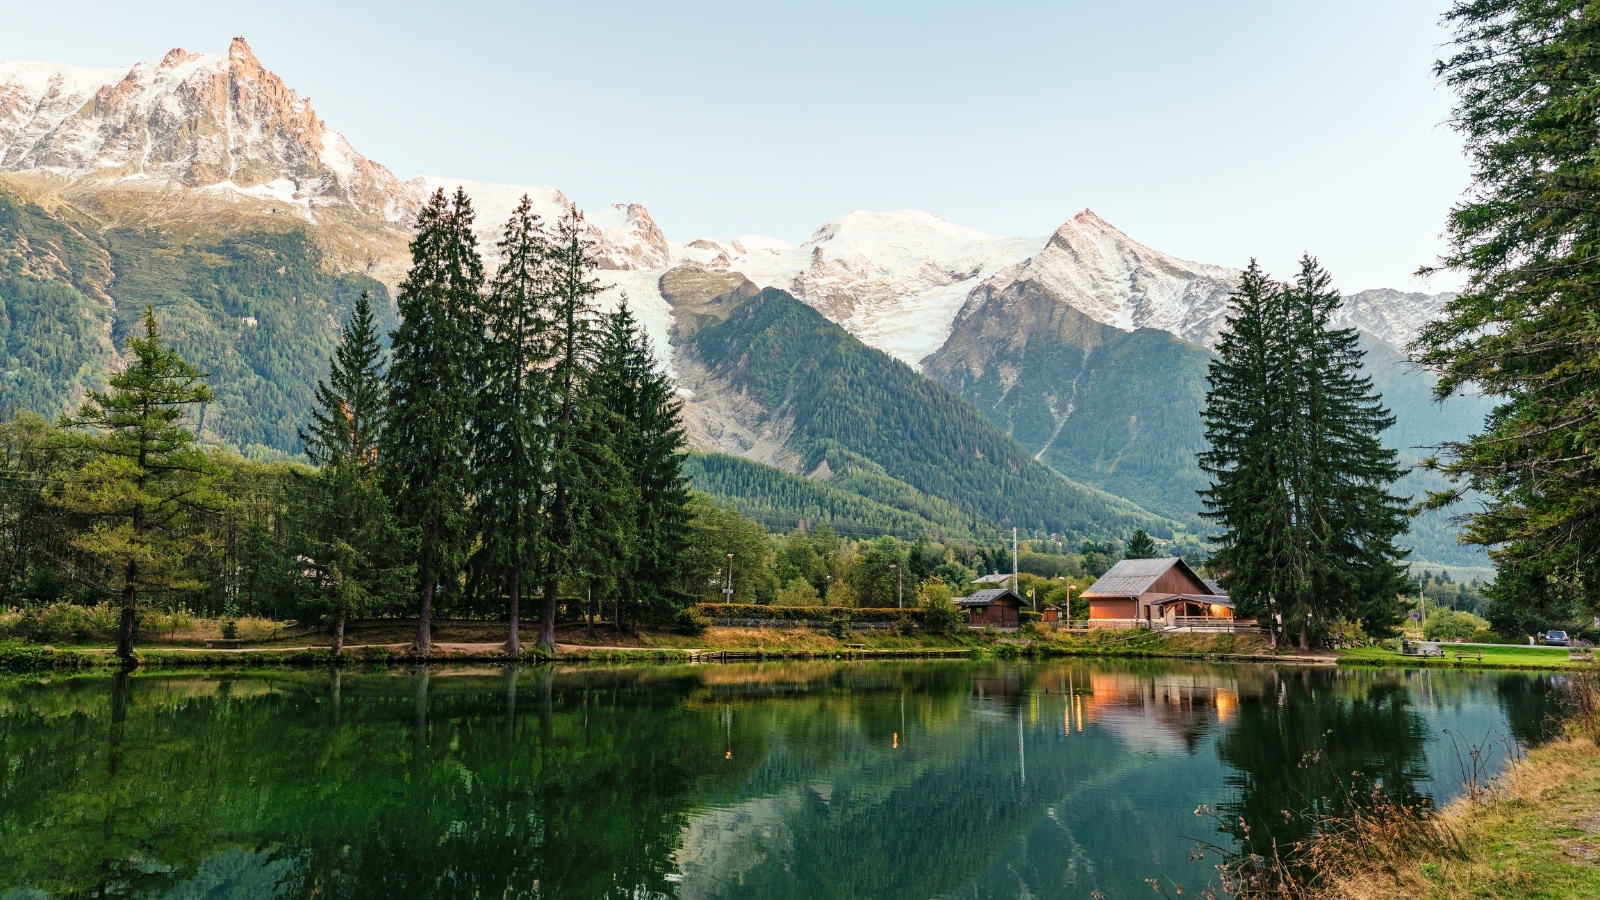 A breathtaking panorama of majestic Alps peaks, snow-capped summits, and pristine landscapes. View of lakes with clear water reflecting tall green pine trees, the Alps and two small huts.